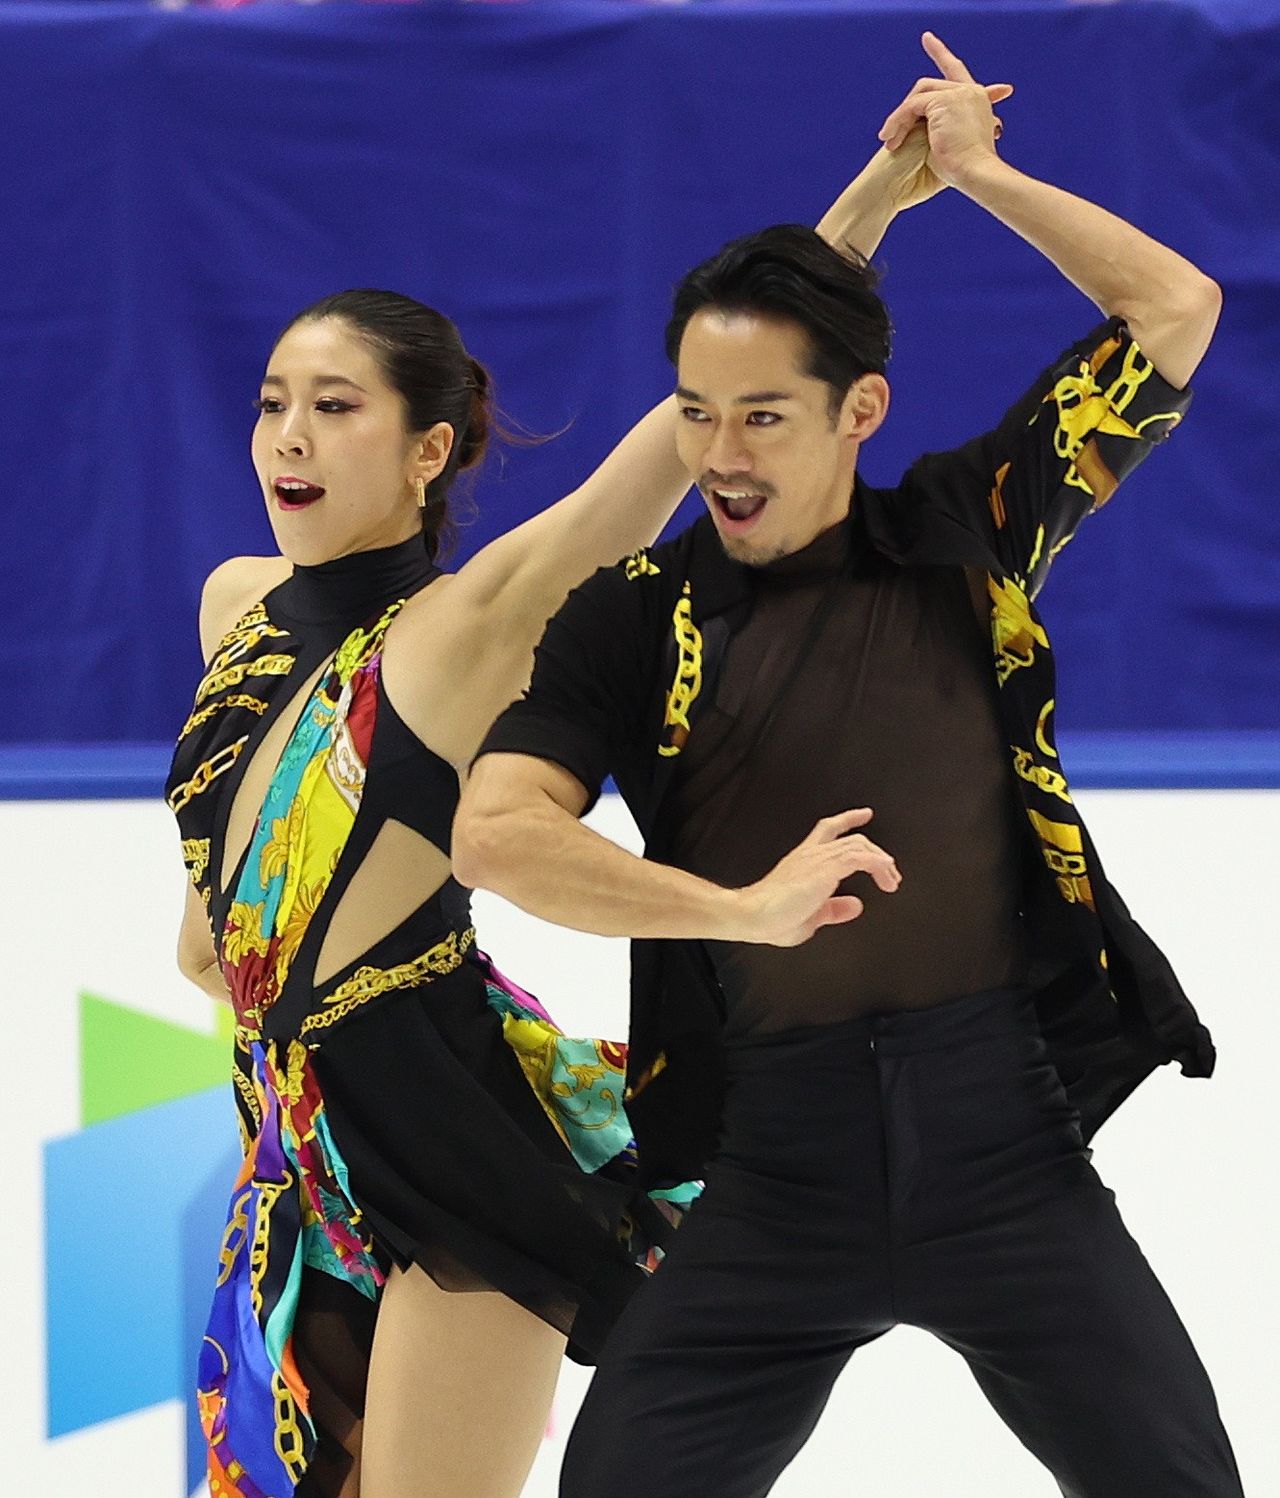 Takahashi and Muramoto, known collectively as “Kanadai,” perform at the 2022 All-Japan Championships on December 12 at the Tōwa Pharmaceutical Ractab Dome. (© Jiji)